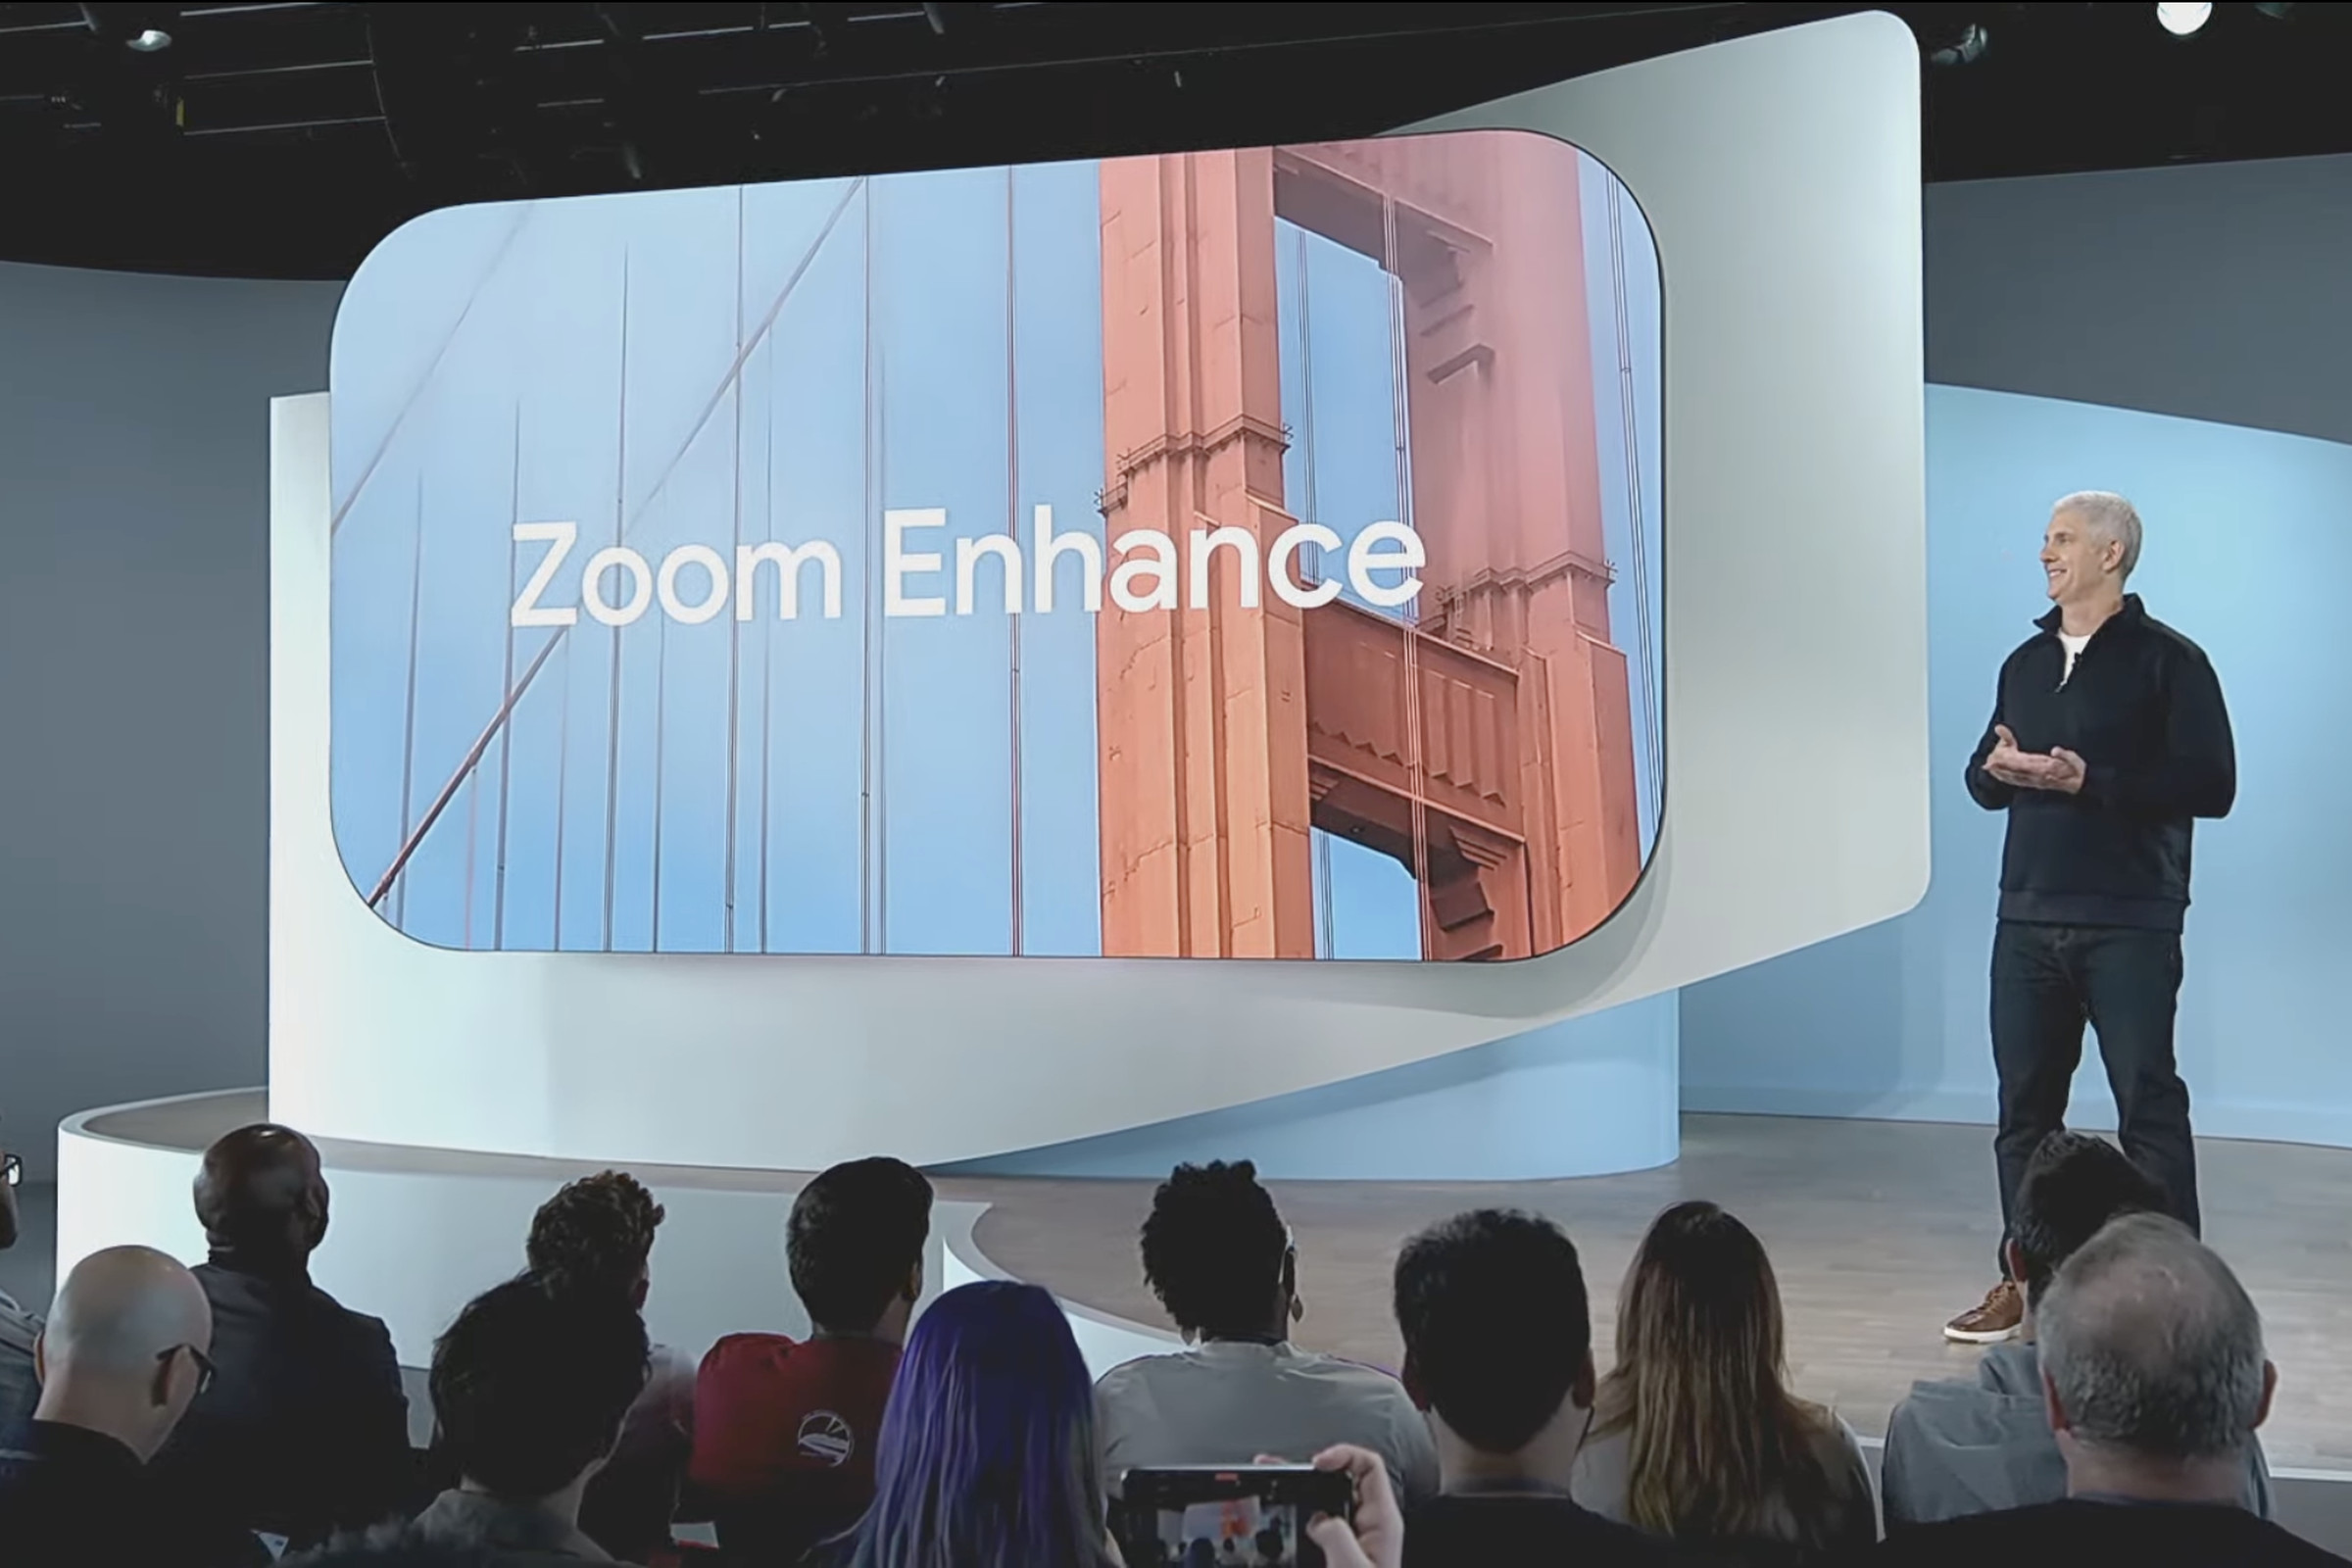 Rick Osterloh standing next to a screen showing “Zoom Enhance.”